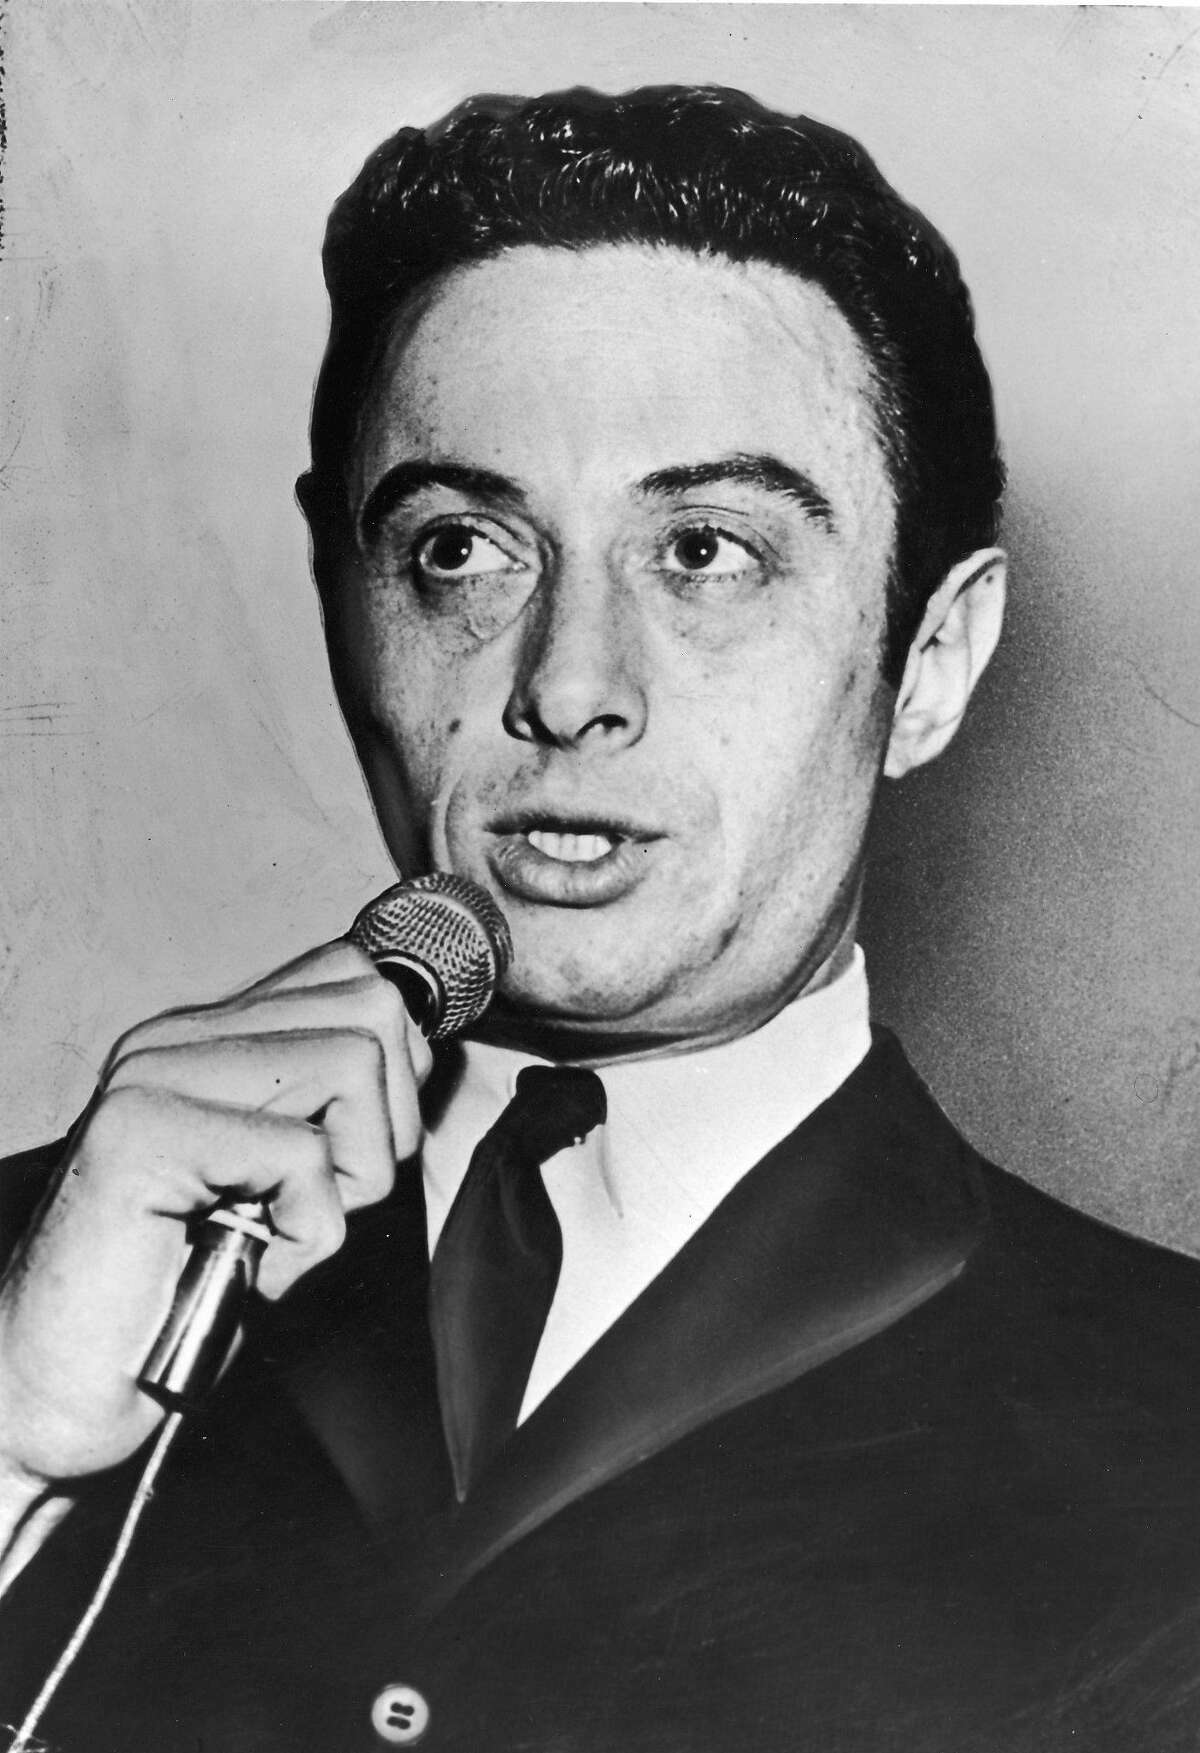 American comedian Lenny Bruce (1925 - 1966) holds a microphone while performing, 1950s. (Photo by Hulton Archive/Getty Images)